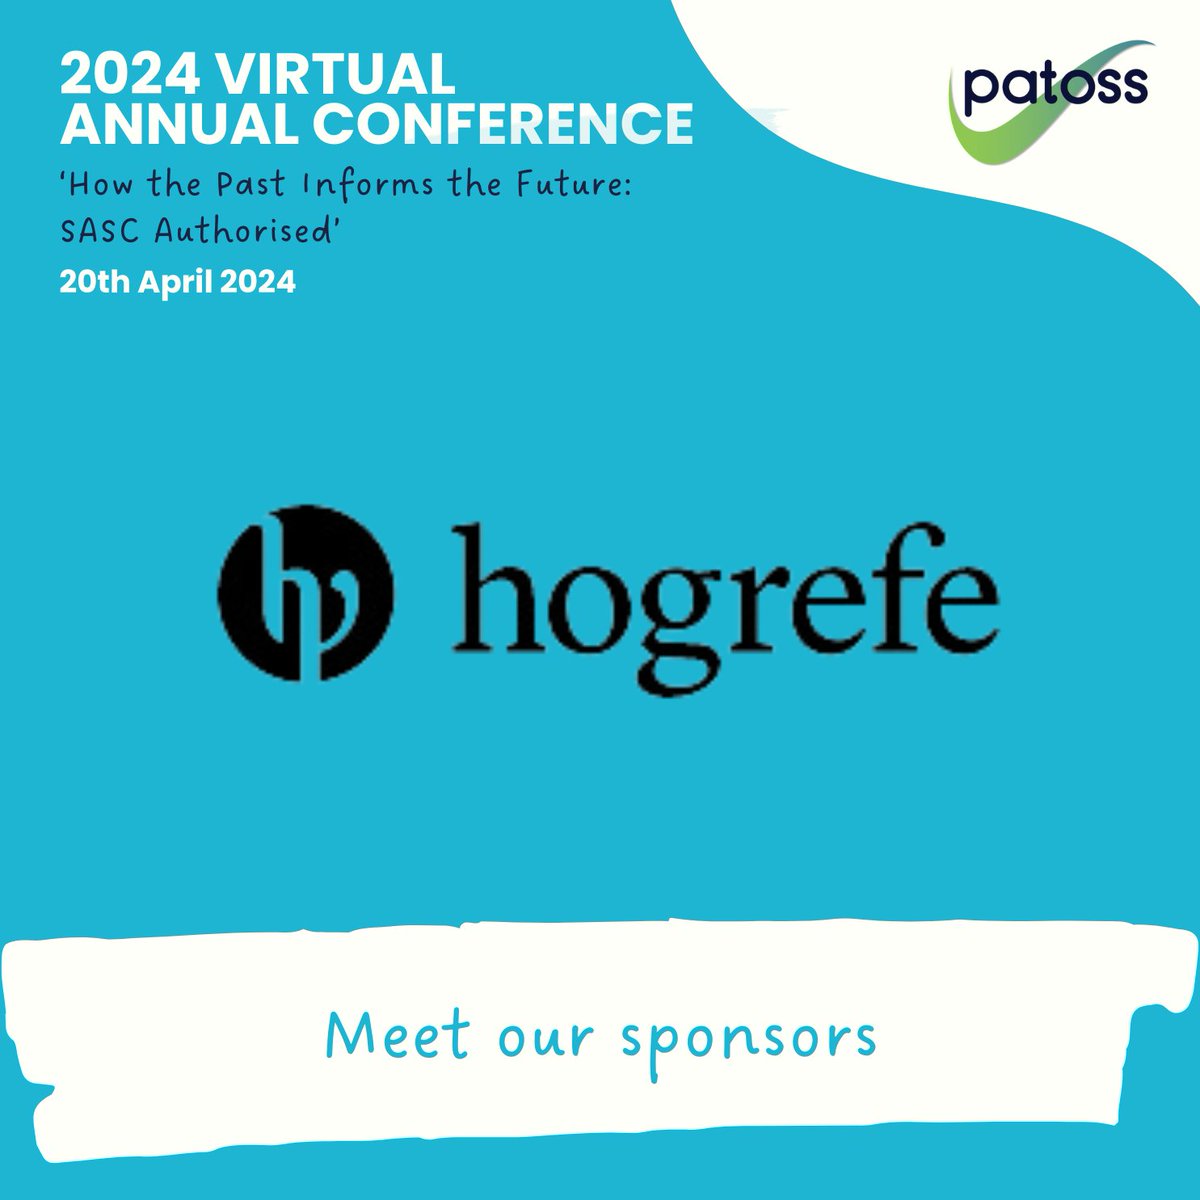 Meet our sponsors! @HogrefeLtd are a leading publisher of psychometric assessments and a training course provider, who combine a scientific approach with in-depth expertise.

Find out more via: hogrefe.com/uk/

#patossconference